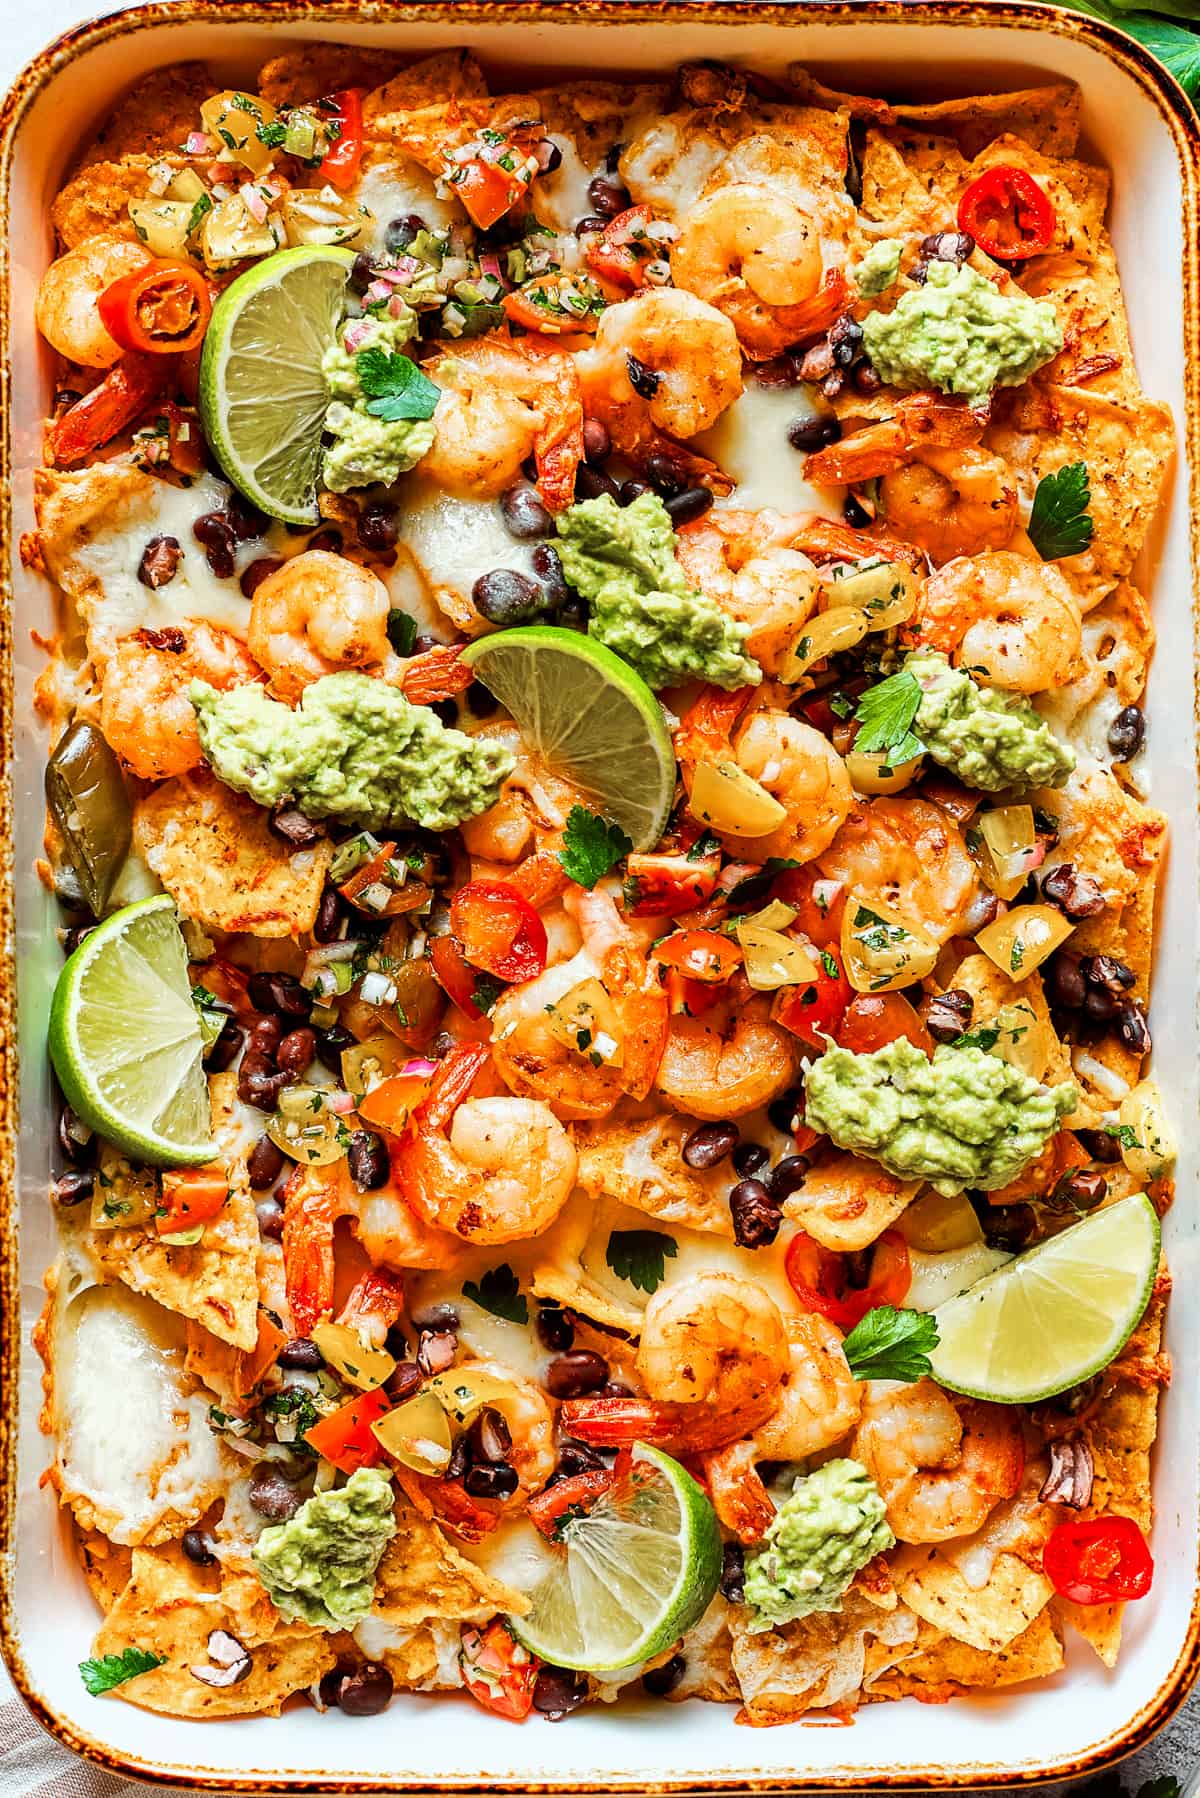 Nacho chips topped with shrimp, cheese, black beans, tomatoes, and a garnish of guacamole and slices of lime.